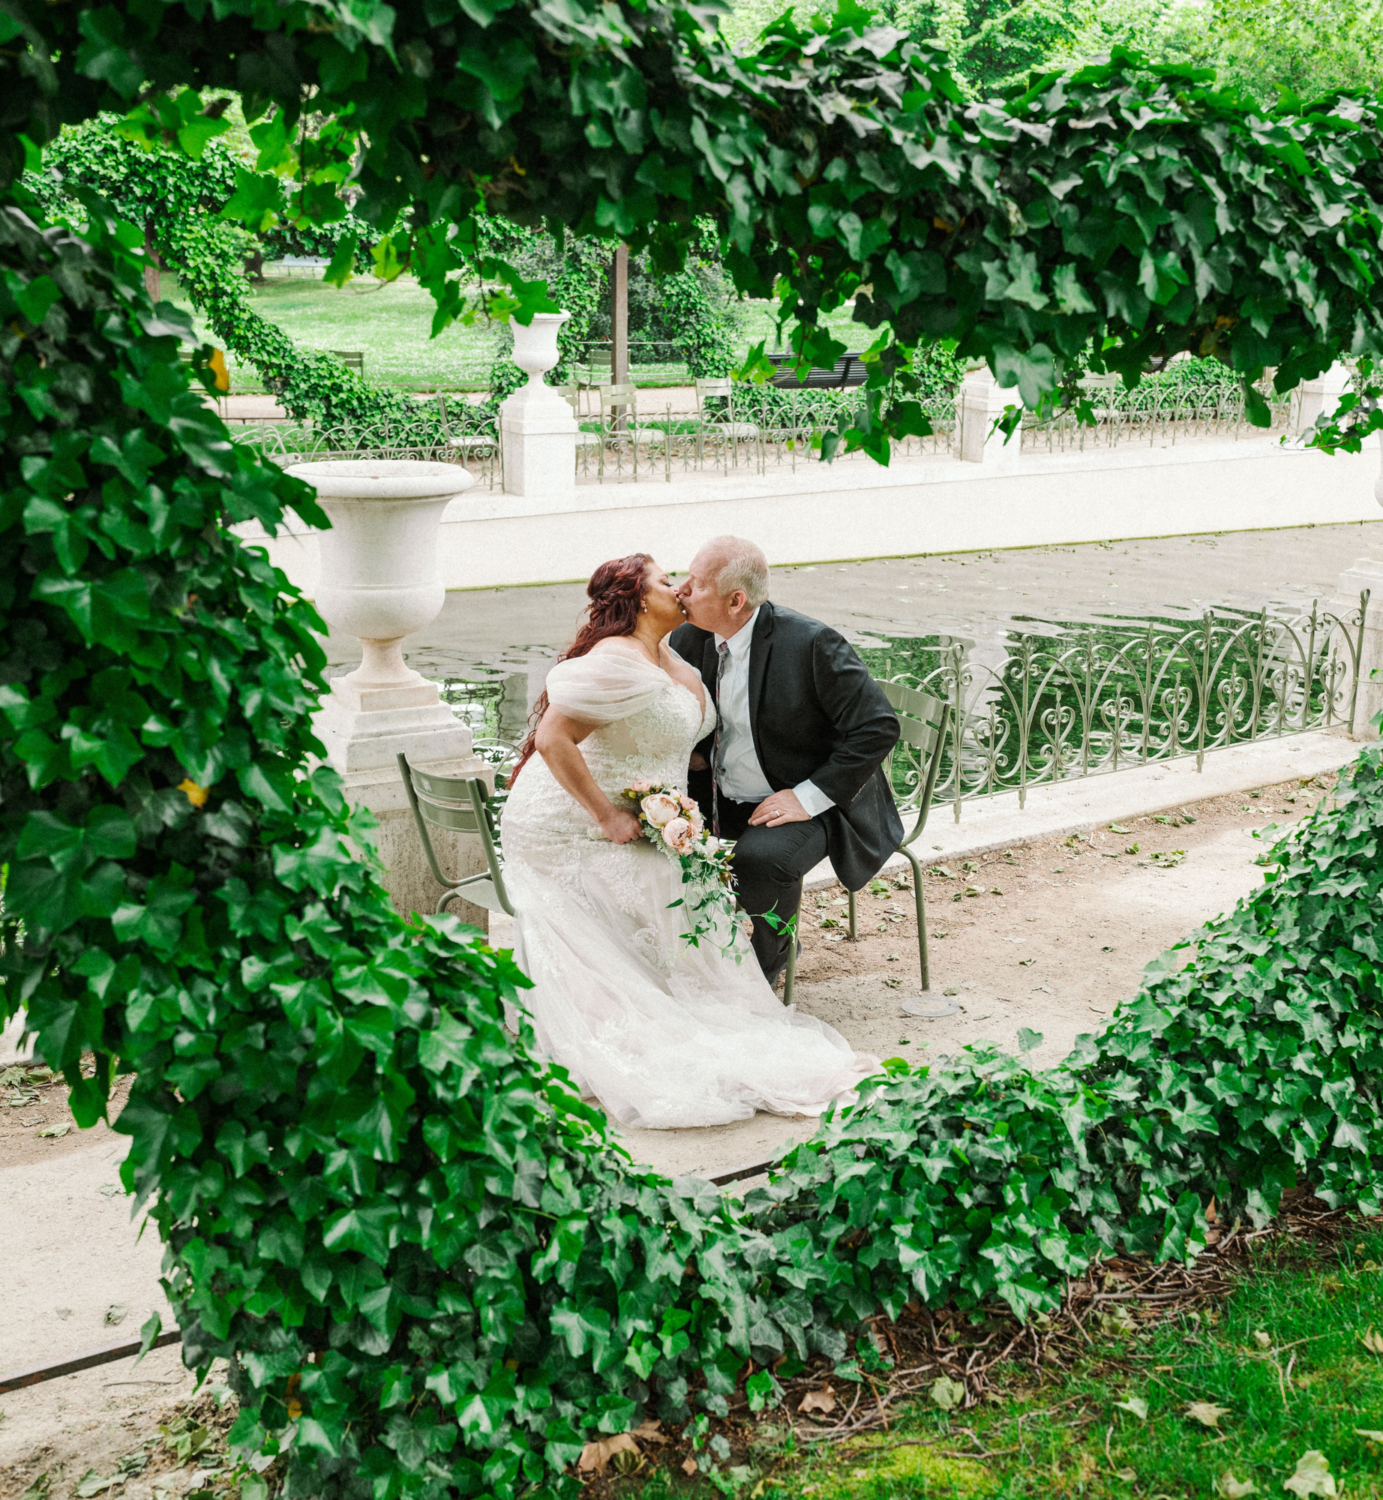 bride and groom kiss among greenery in paris france